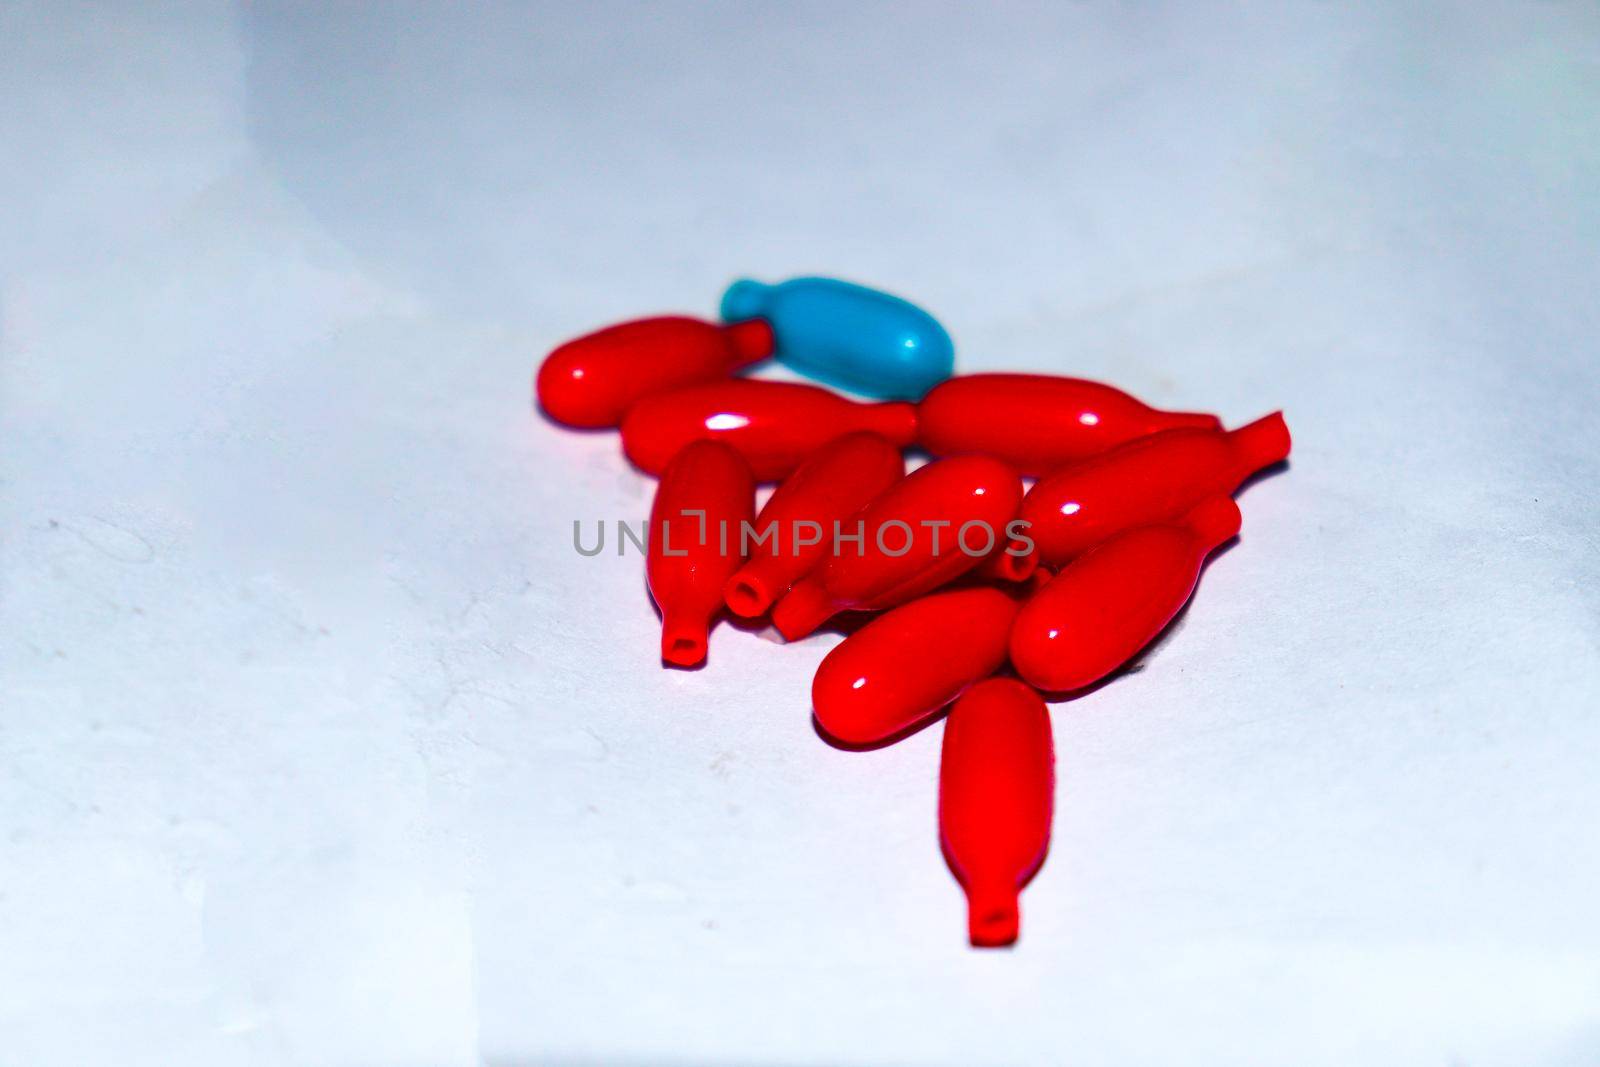 red colored vitamin a capsule stock for kid